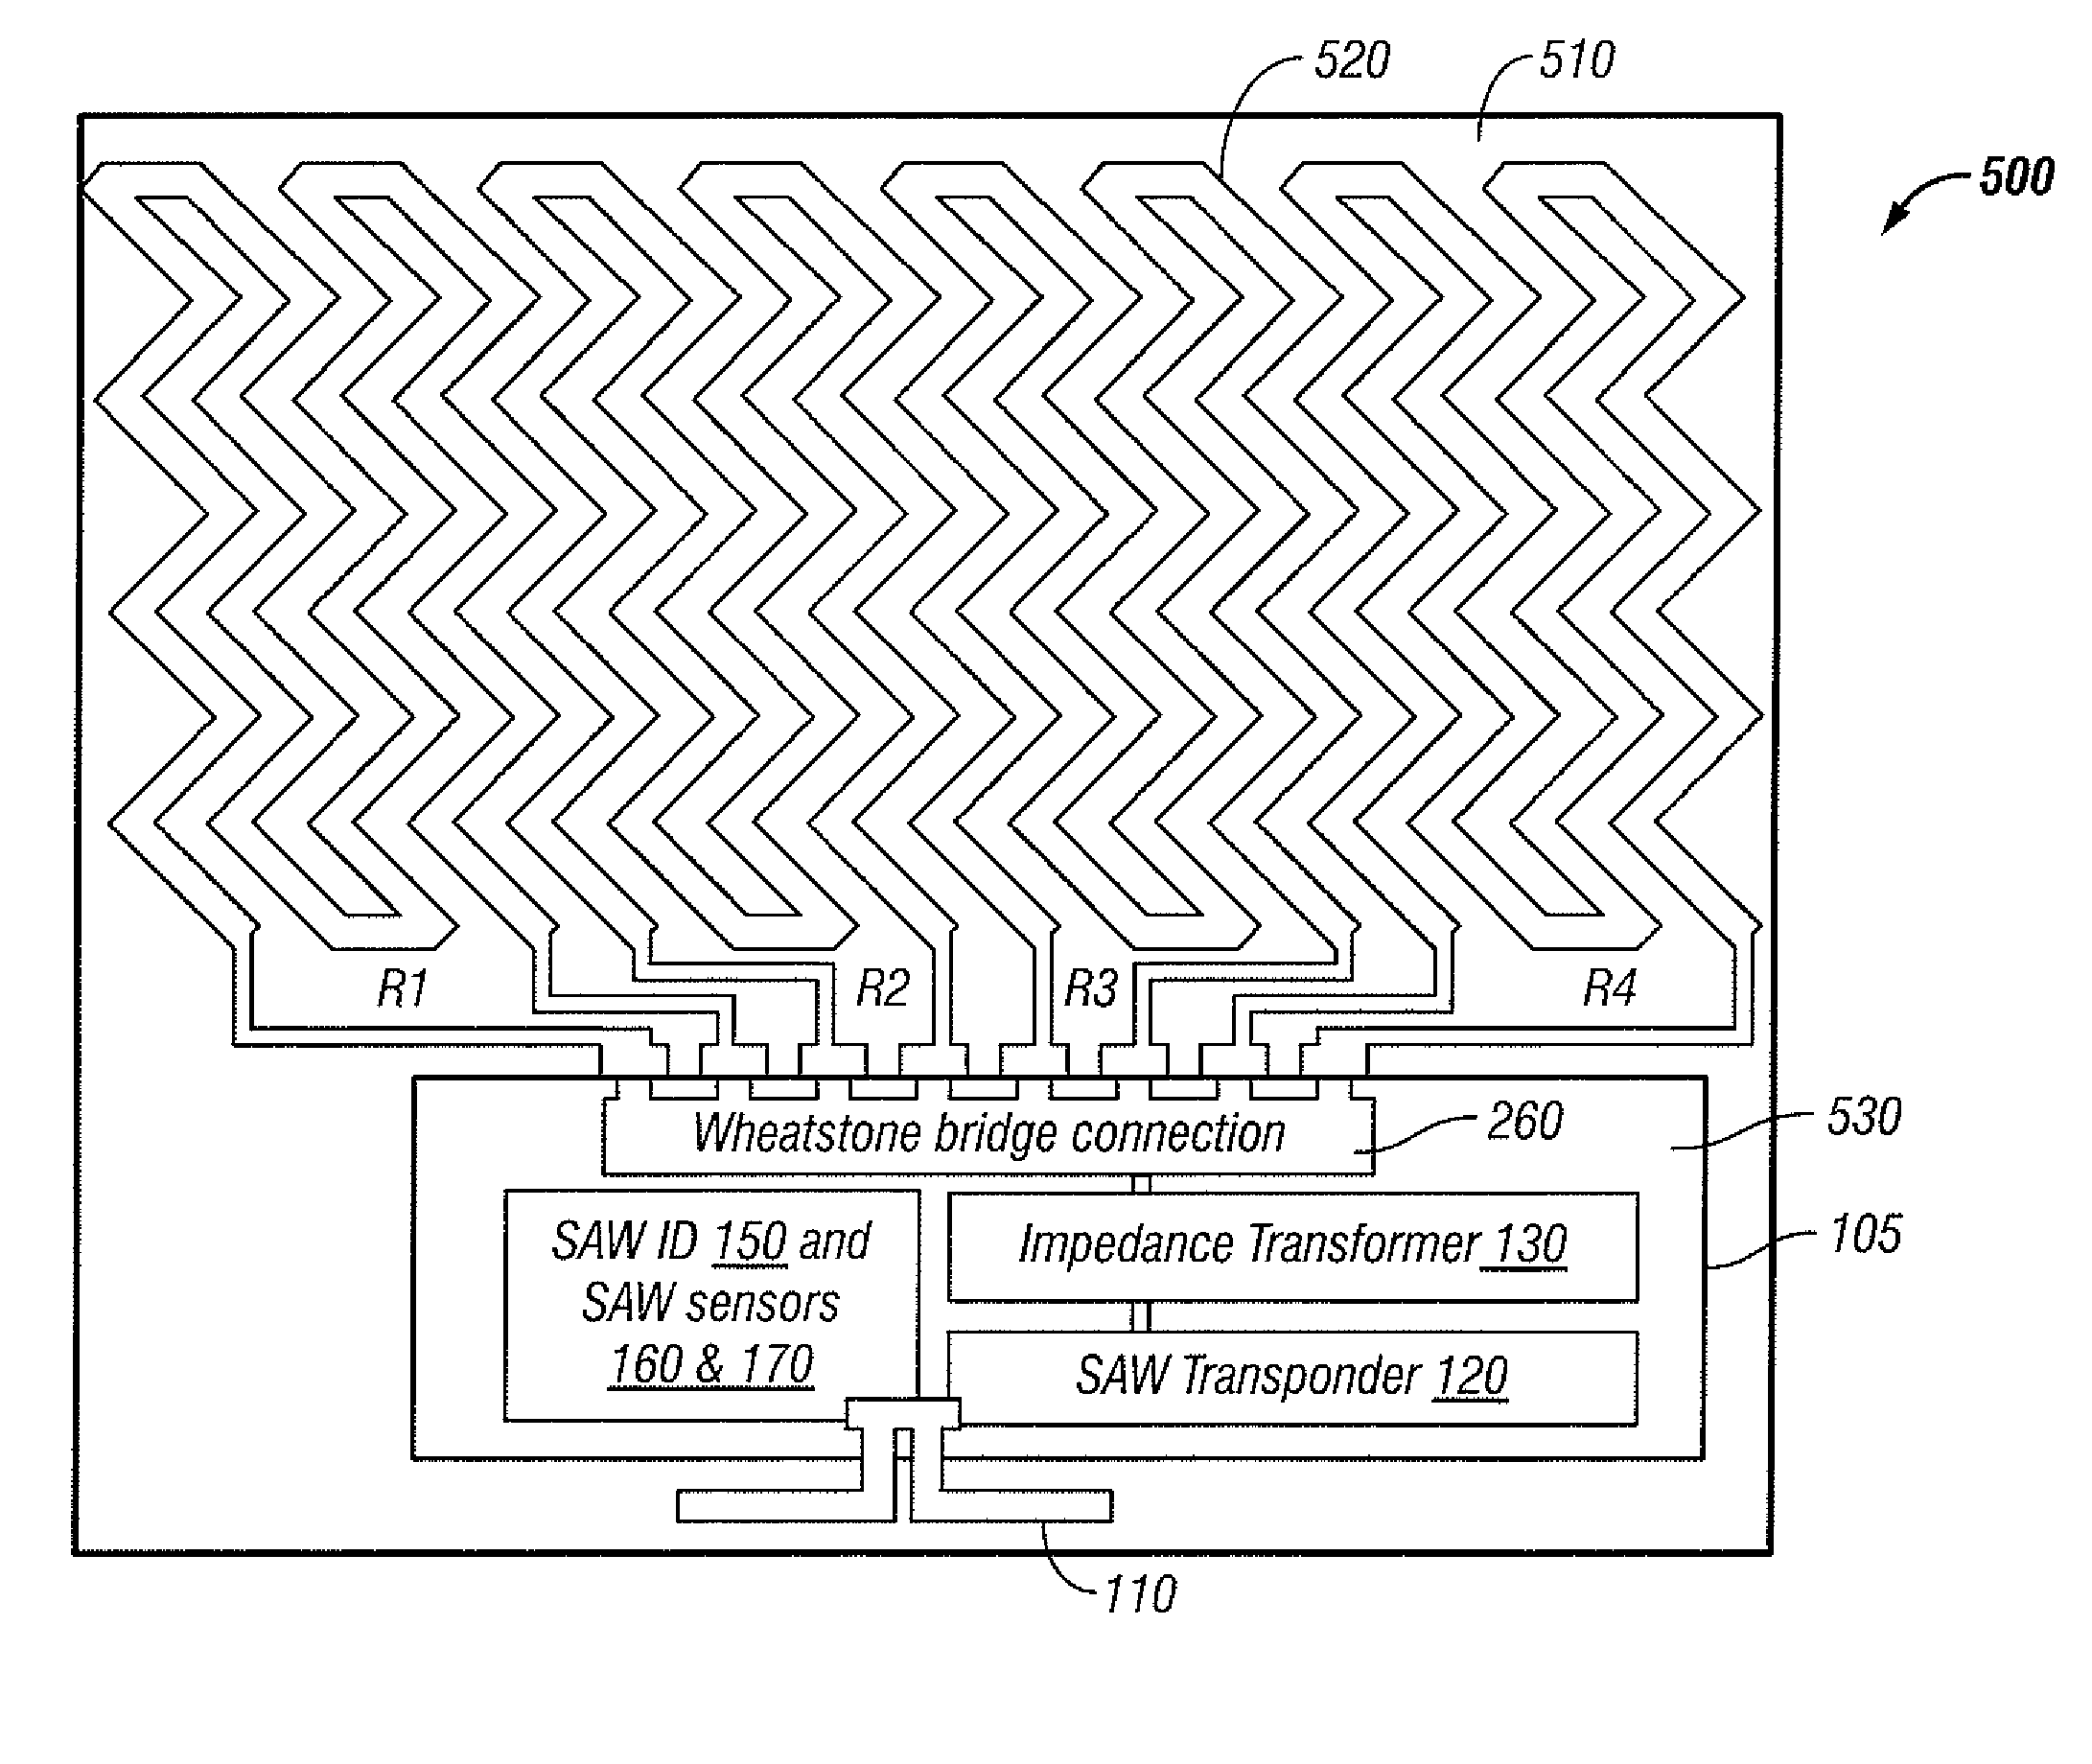 Intelligent packaging method and system based on acoustic wave devices